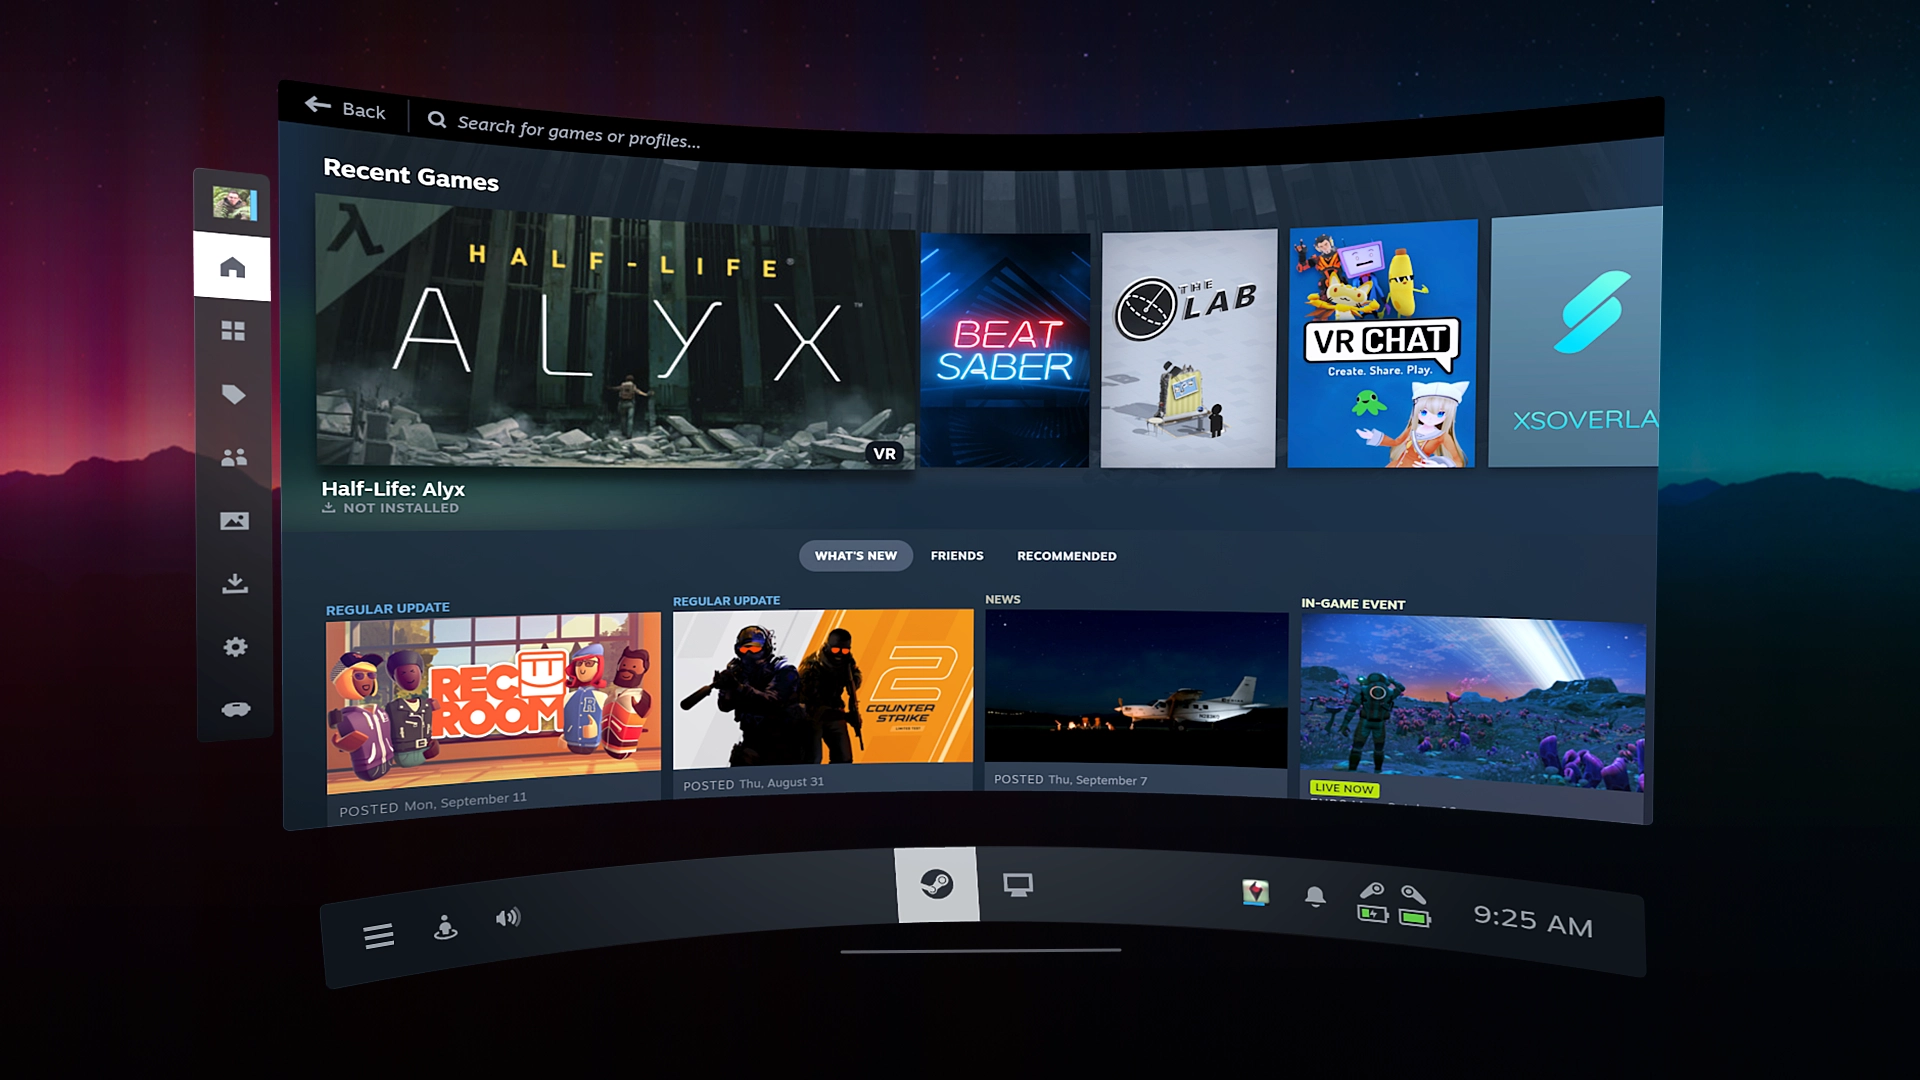 Valve Introduces SteamVR 2.0 with Enhanced Features